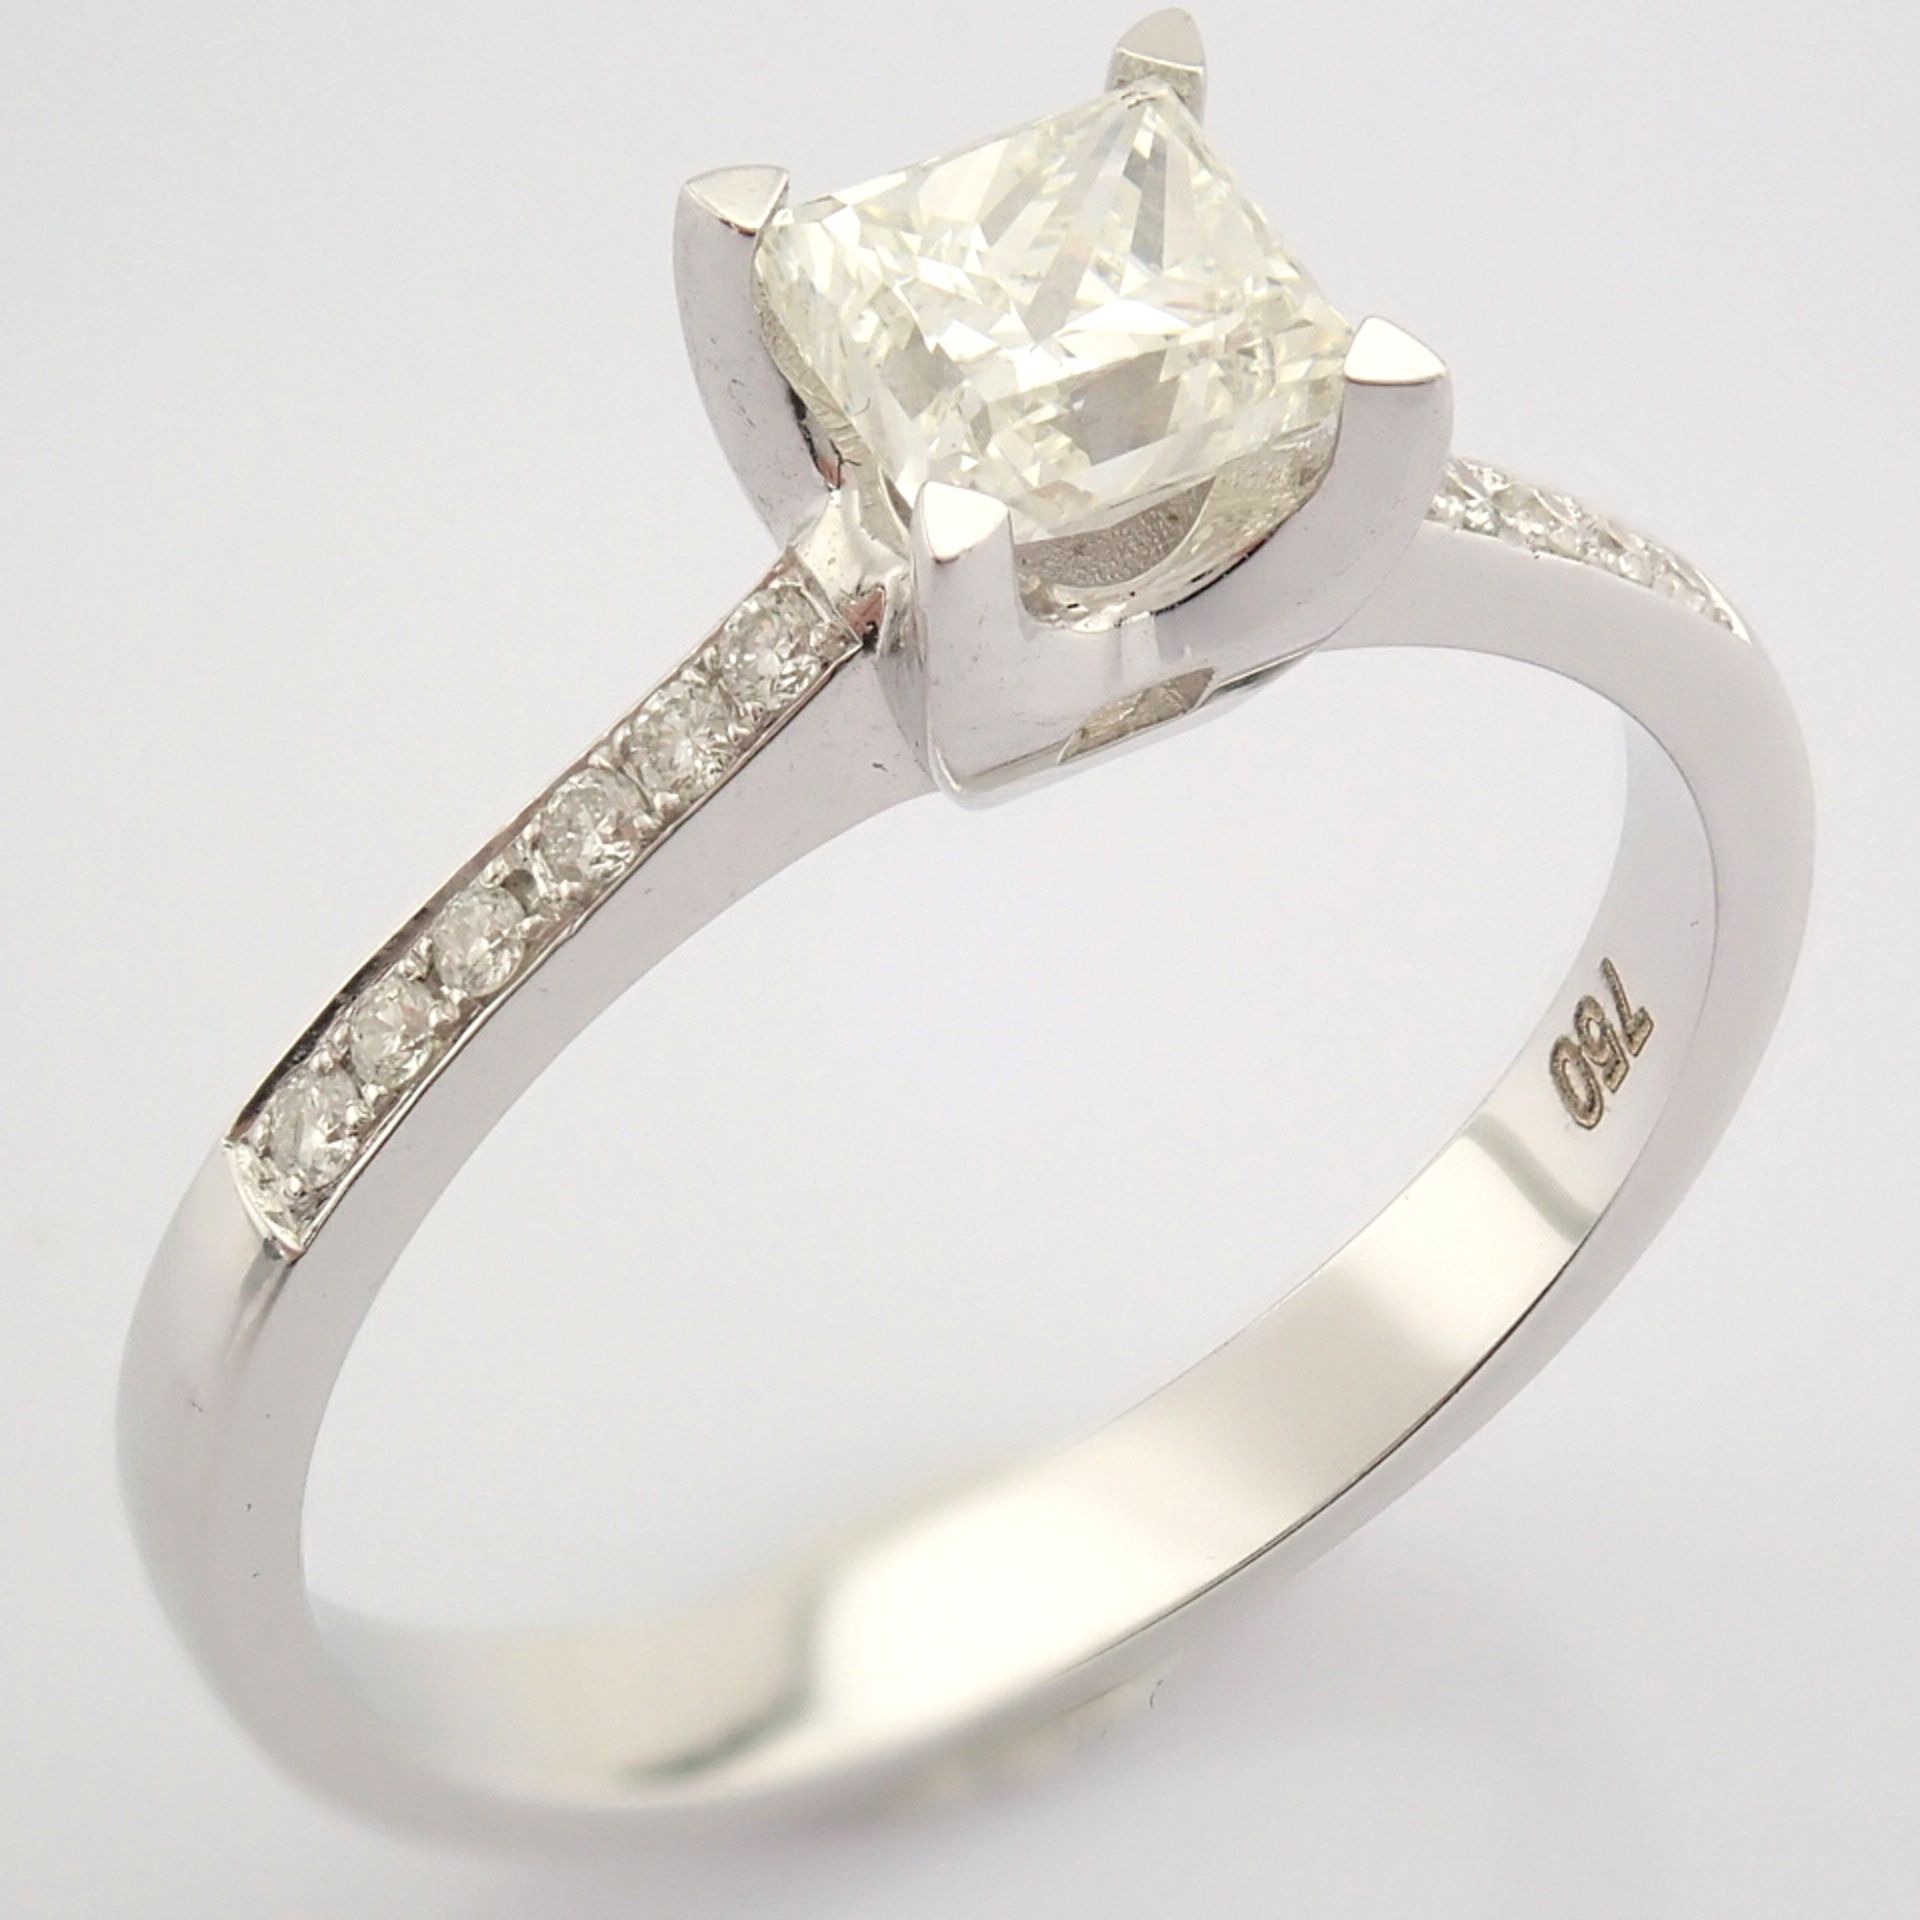 Certificated 18K White Gold Diamond Ring (Total 0.77 ct Stone) - Image 4 of 9